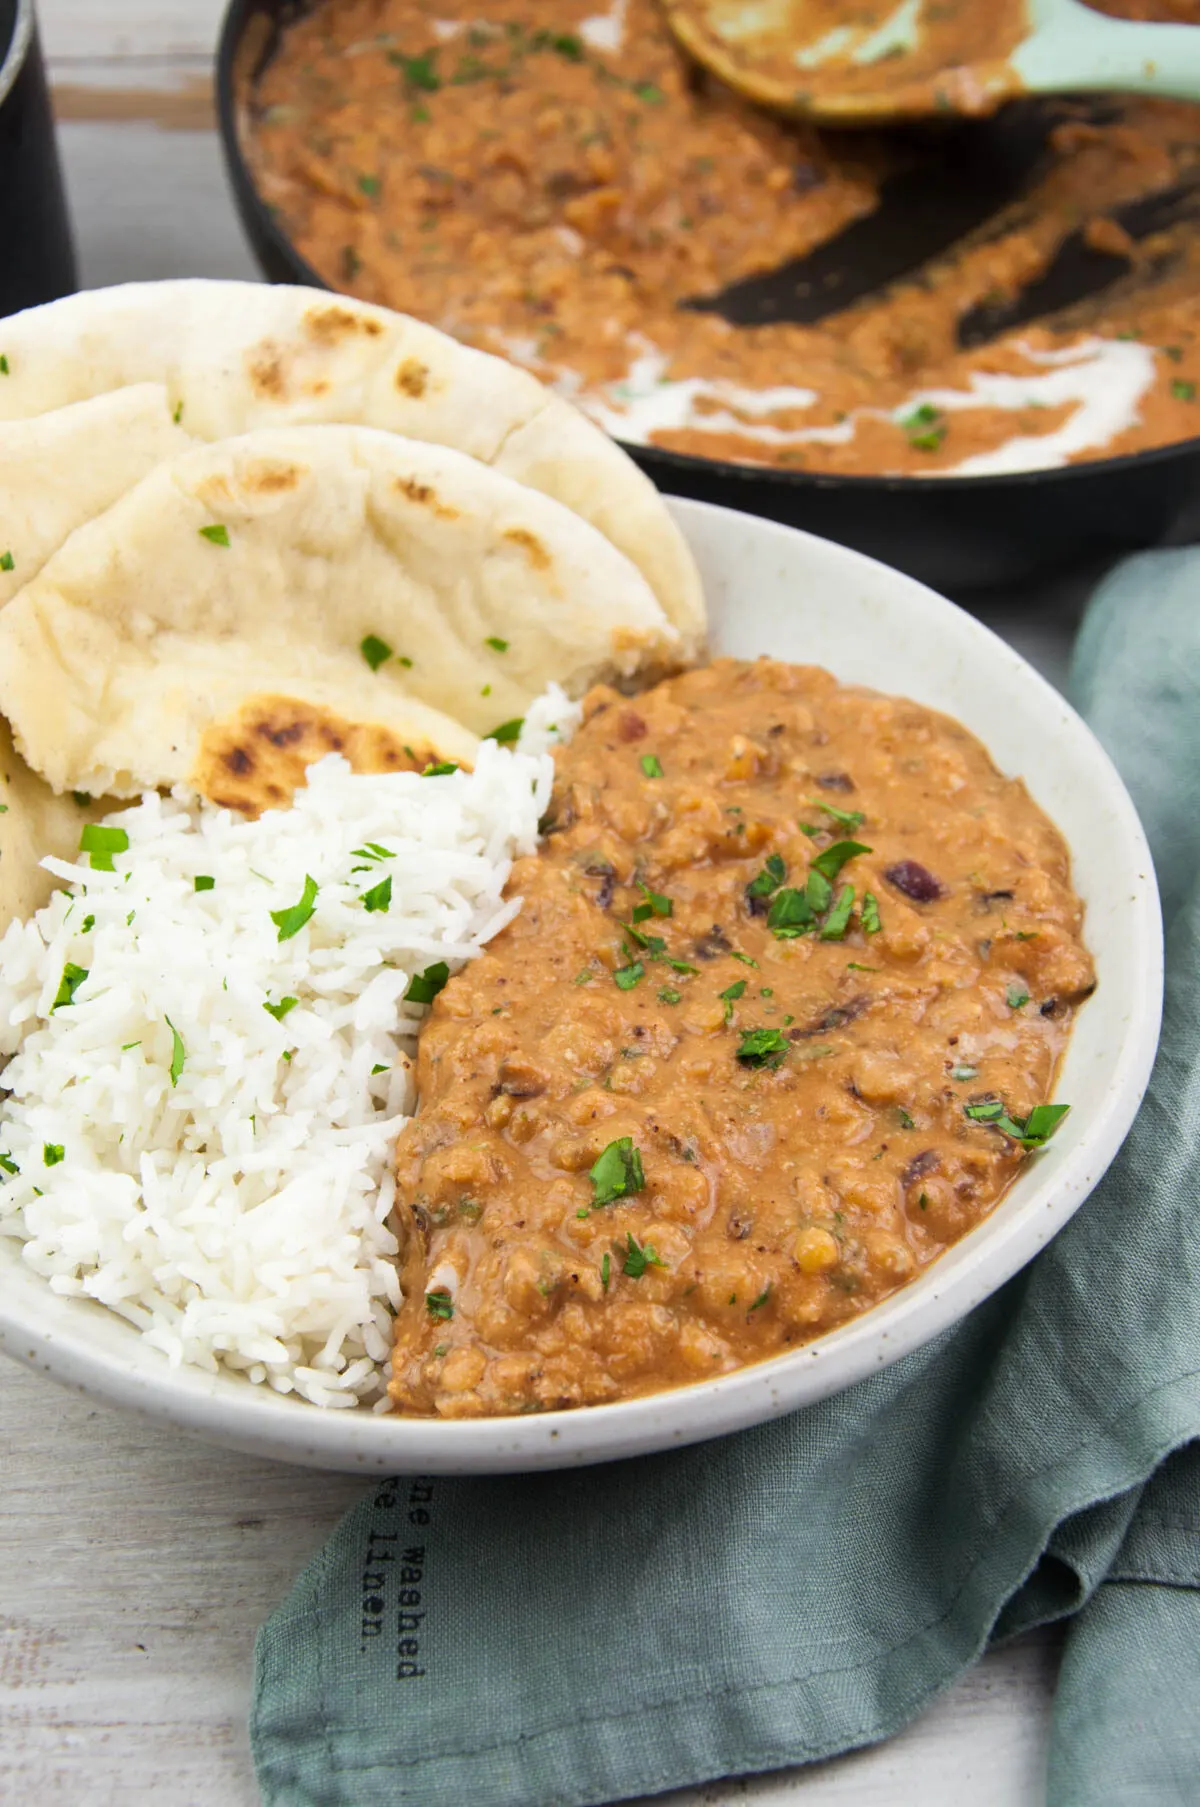 Vegan Red Lentil Curry with basmati rice and naan